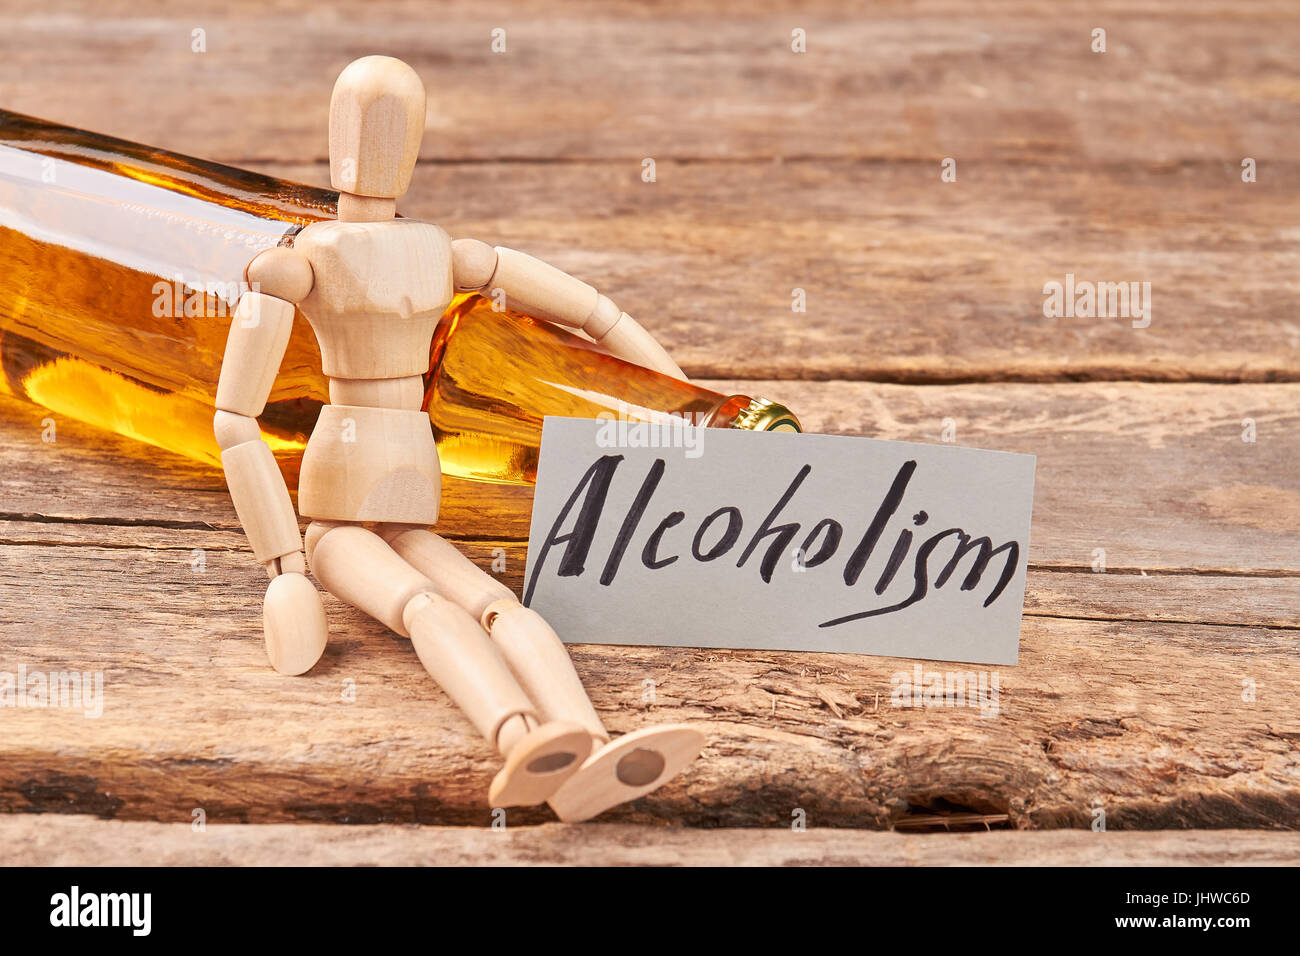 Human wooden dummy and alcohol. Stock Photo